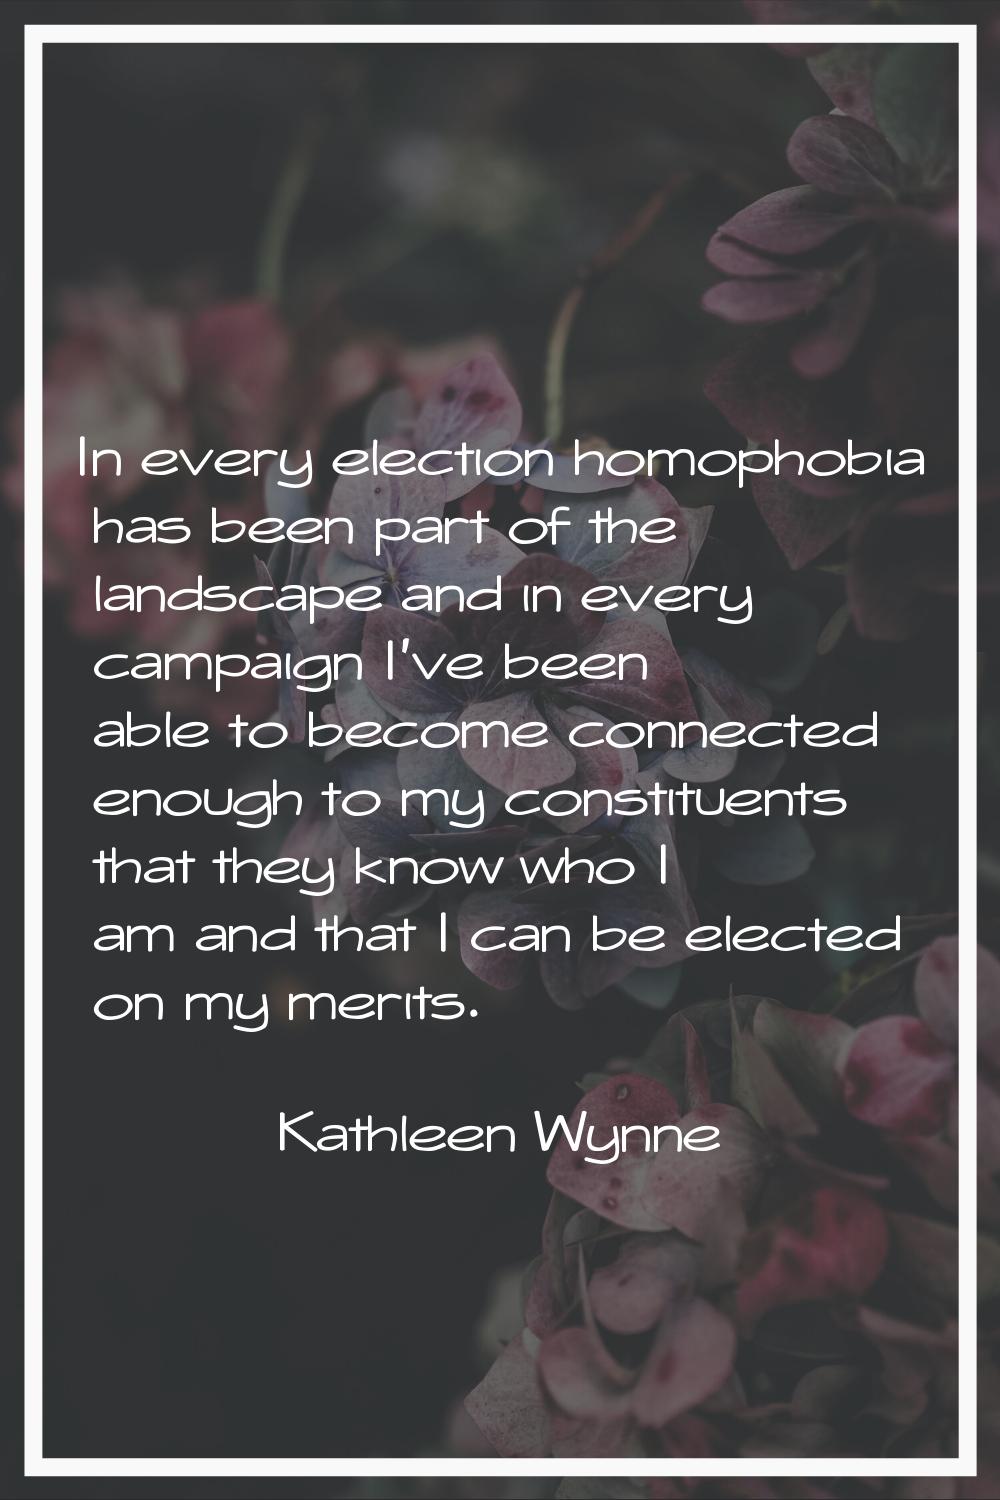 In every election homophobia has been part of the landscape and in every campaign I've been able to